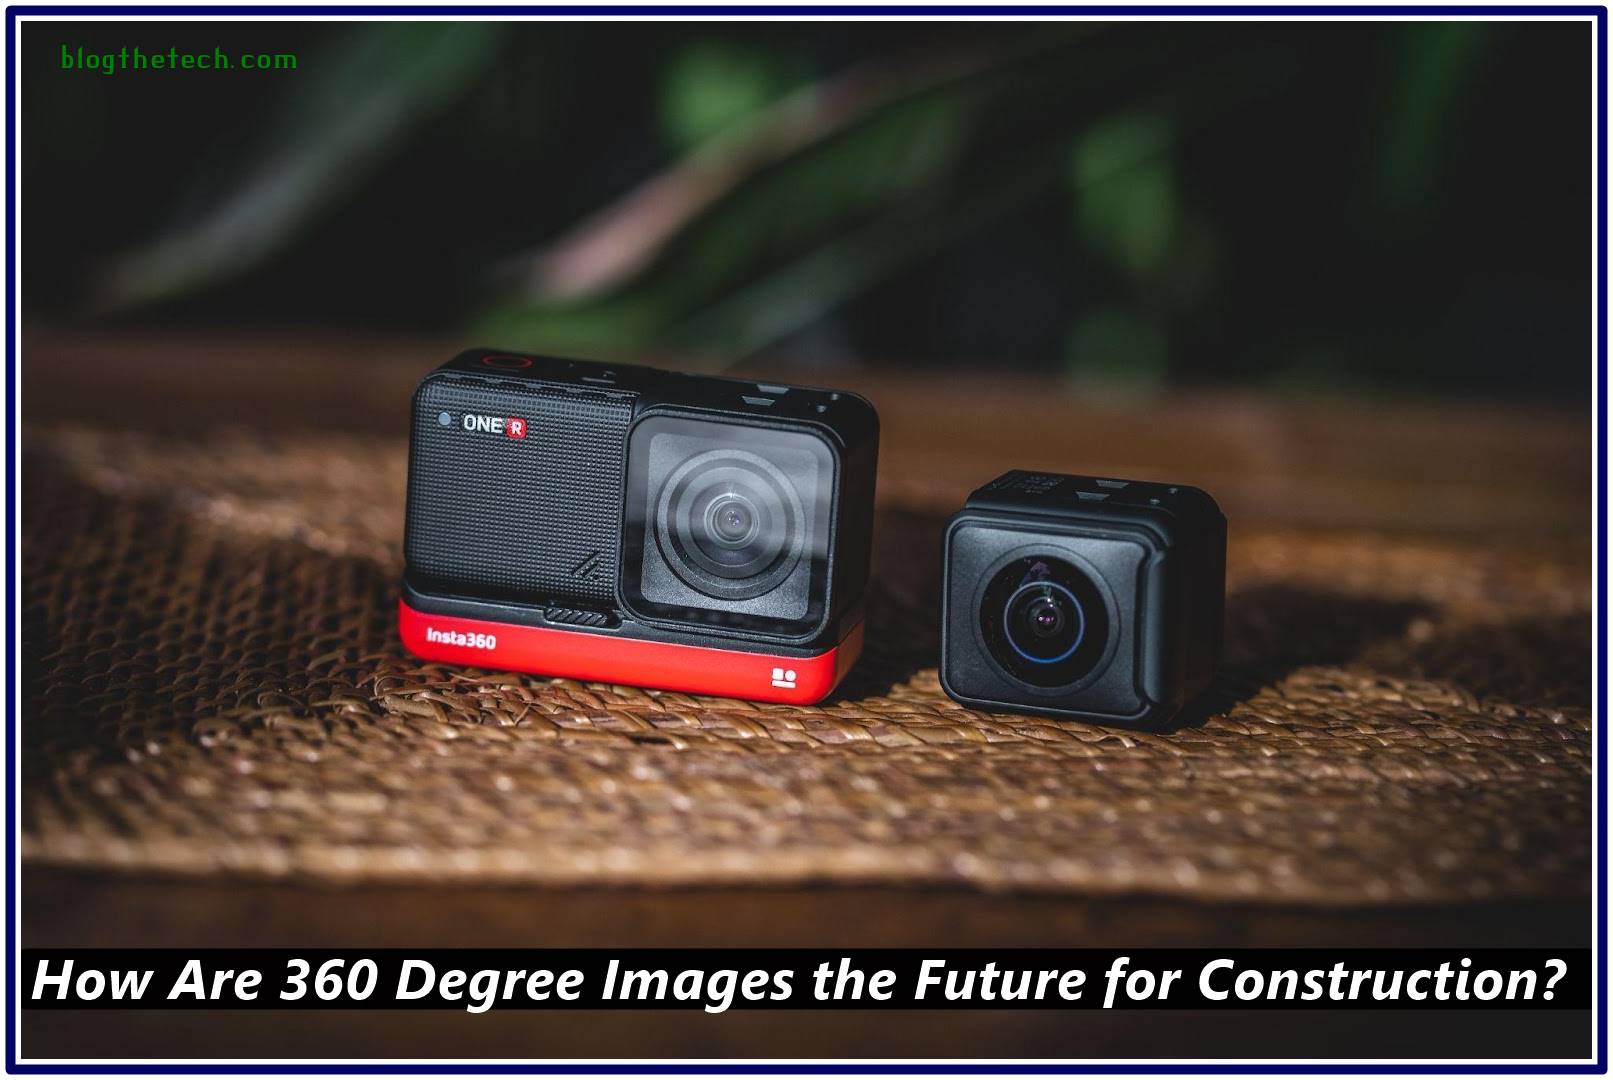 How Are 360 Degree Images the Future for Construction?